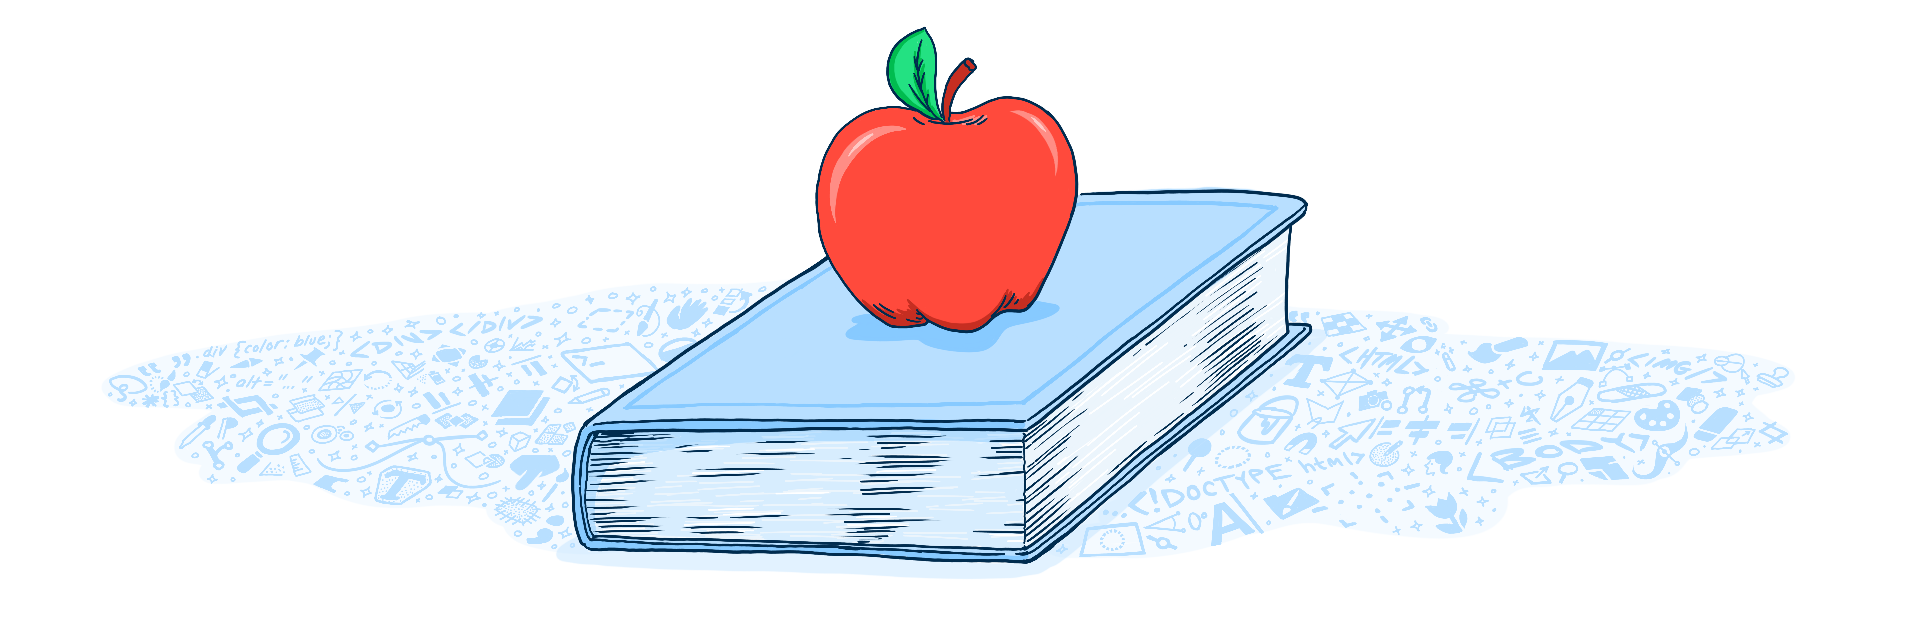 Illustration of a book and an apple.